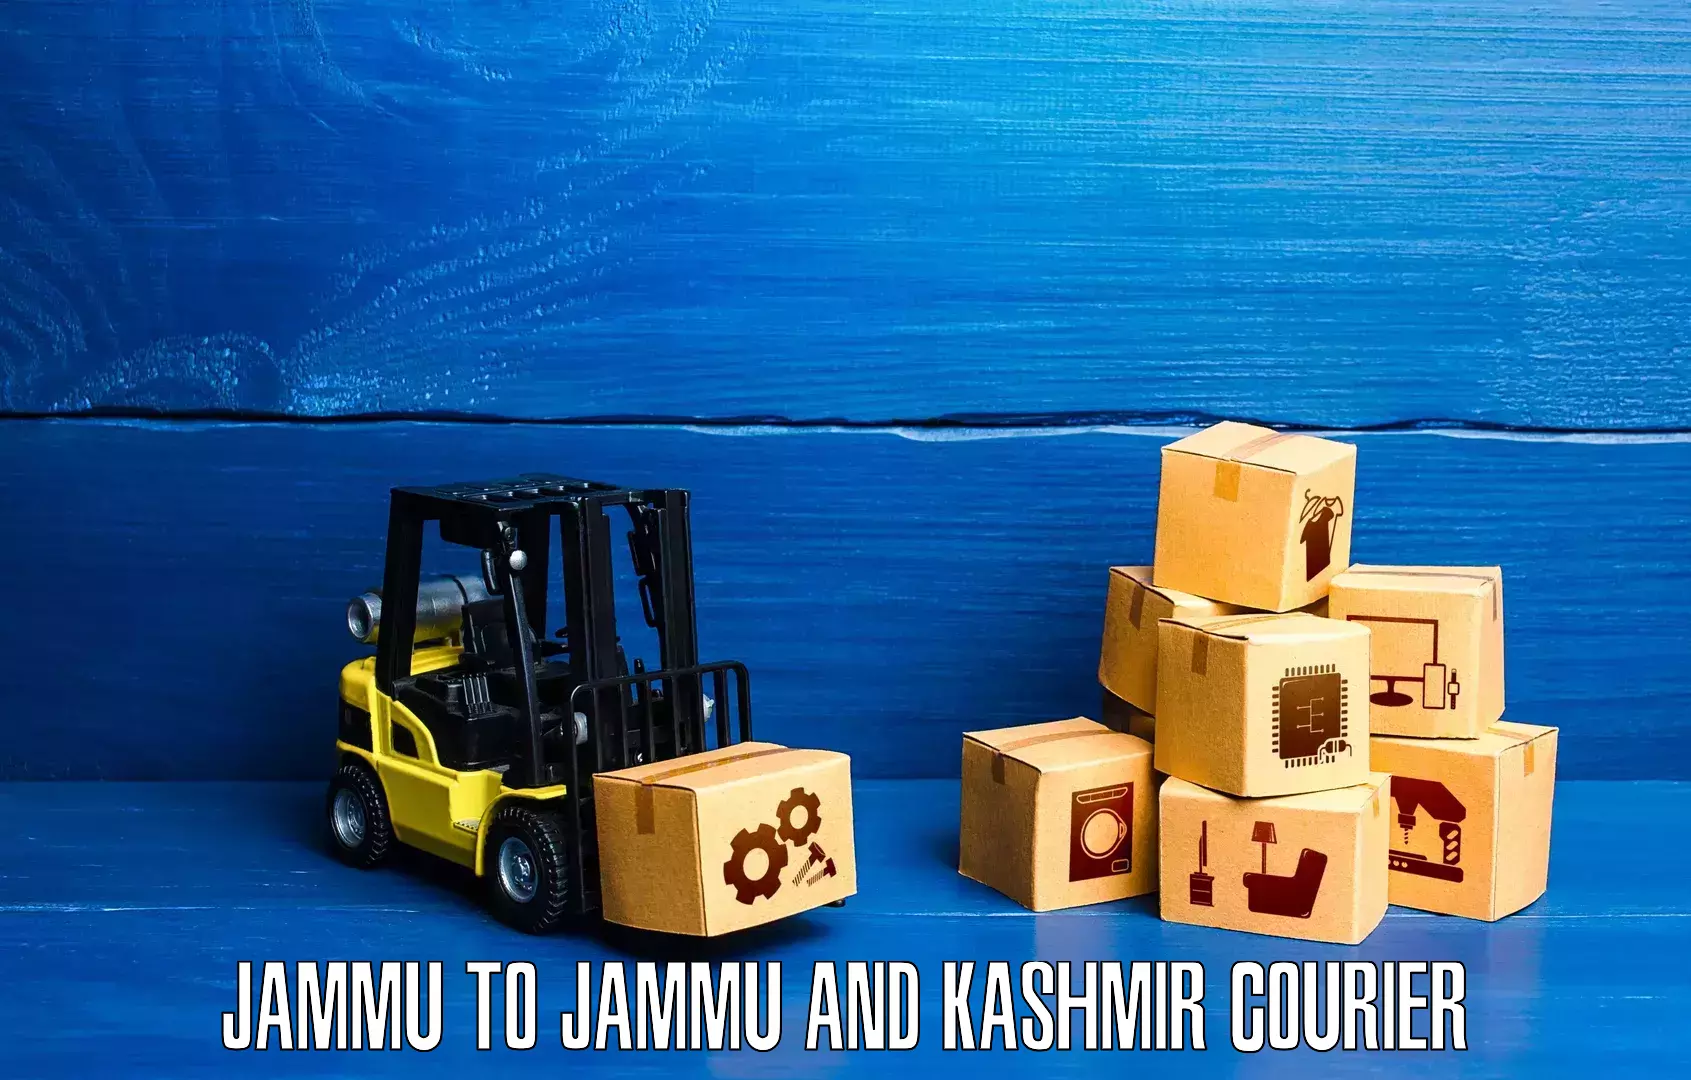 Local delivery service Jammu to Jammu and Kashmir